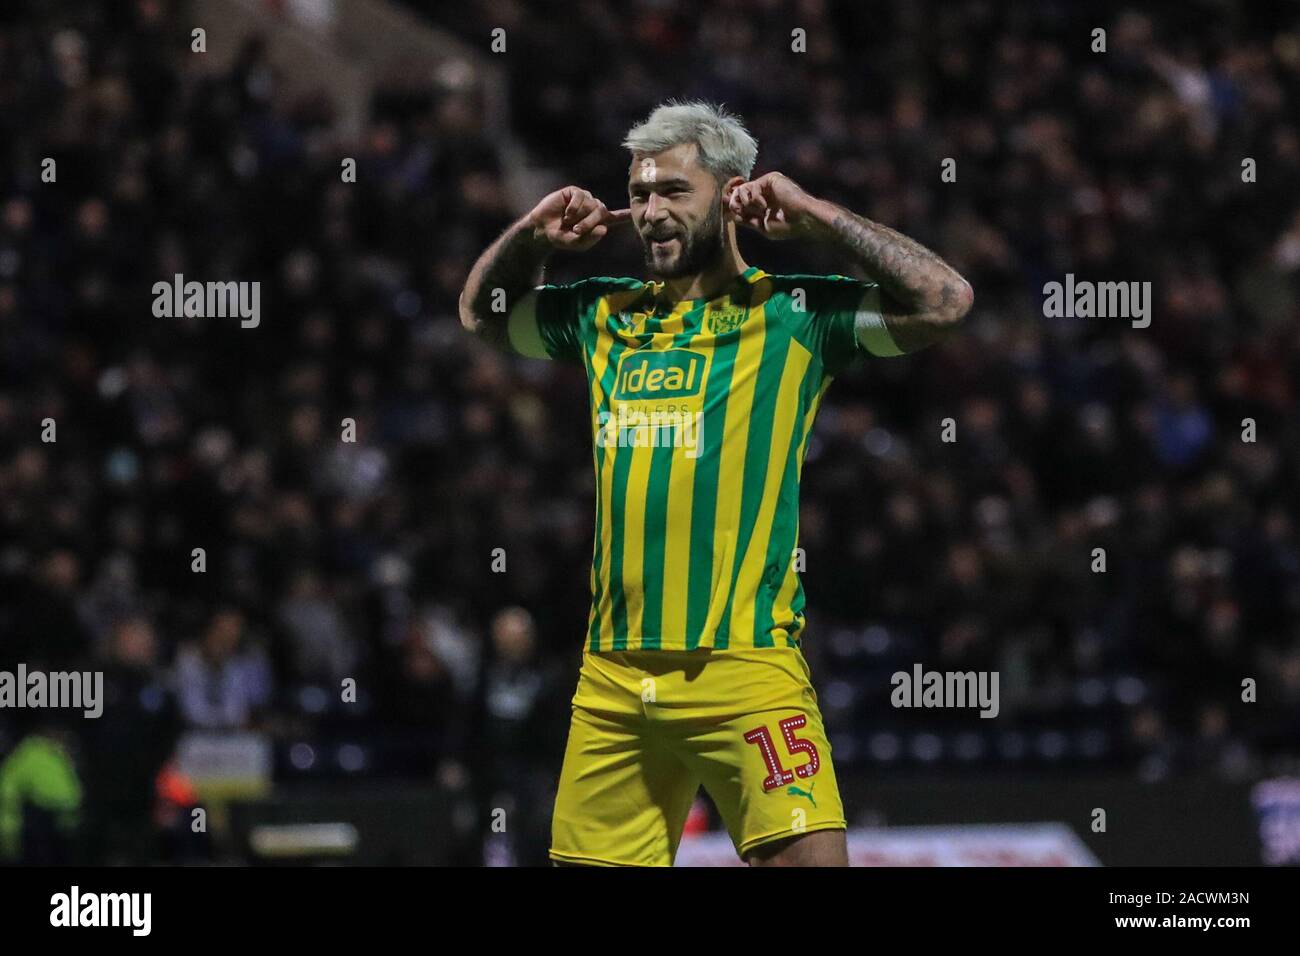 2nd December 2019, Deepdale, Preston, England; Sky Bet Championship, Preston North End v West Bromwich Albion : Charlie Austin (15) of West Bromwich Albion  celebrates his goal to make it 0-1 Credit: Mark Cosgrove/News Images Stock Photo